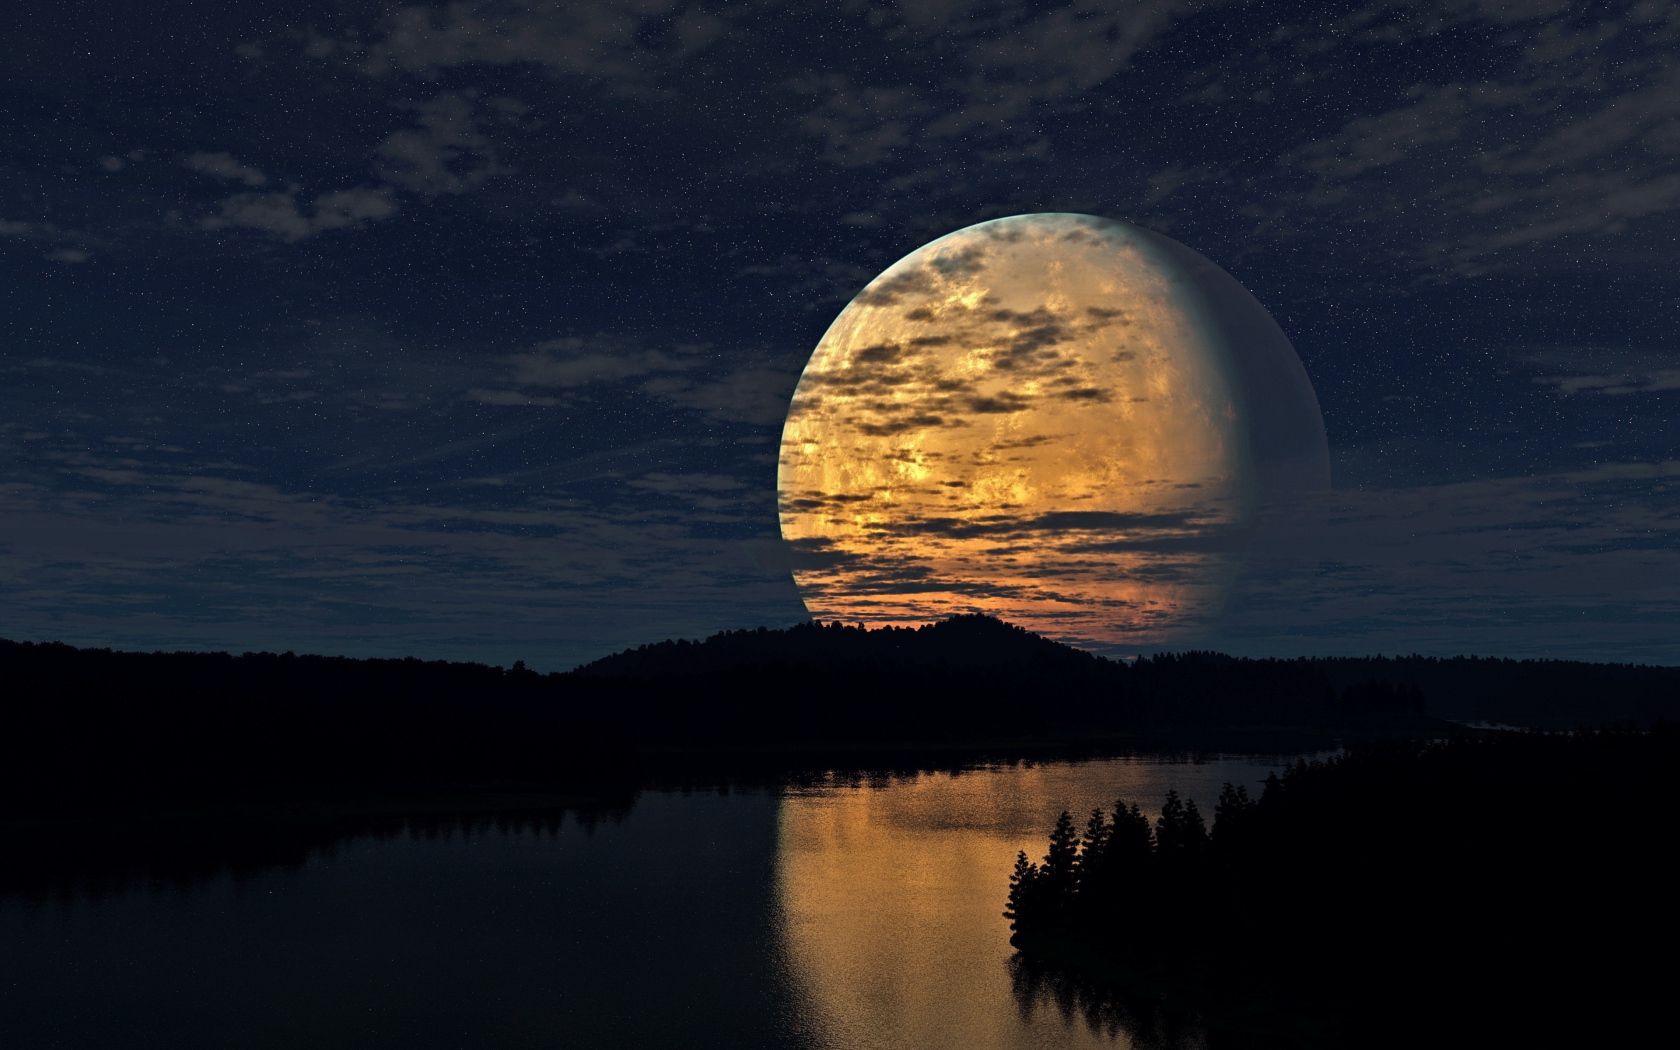 A huge moon is reflected in the river at night